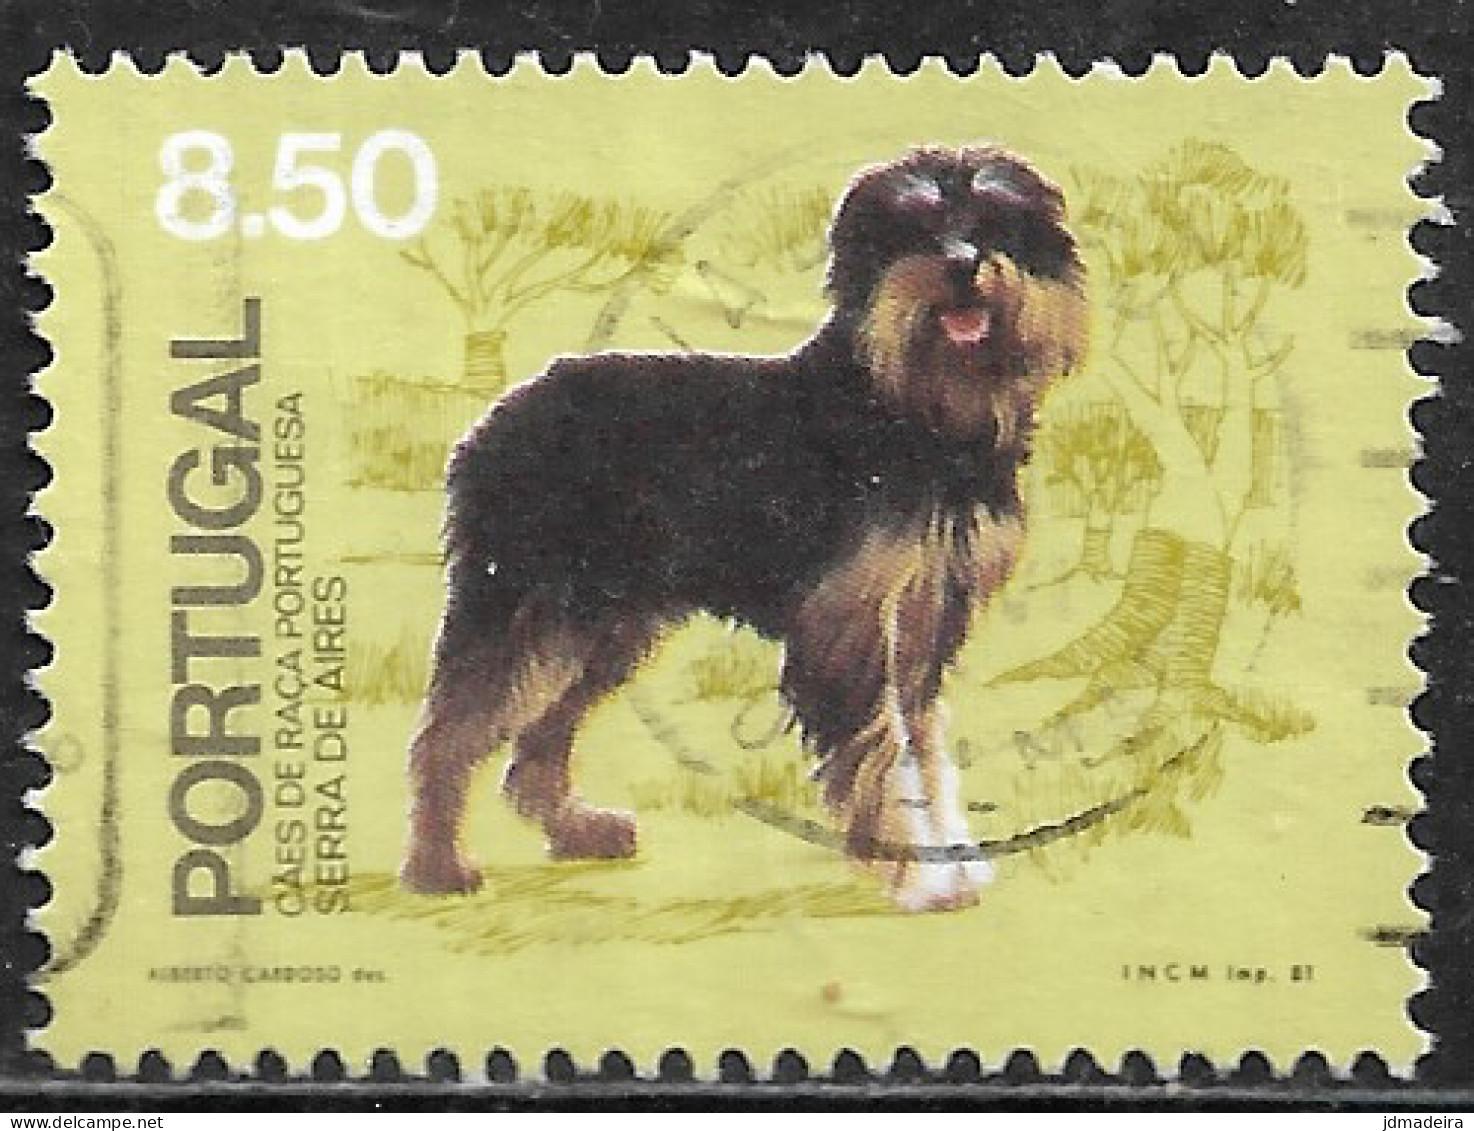 Portugal – 1981 Portuguese Breed Dogs 8.50 Used Stamp - Gebraucht